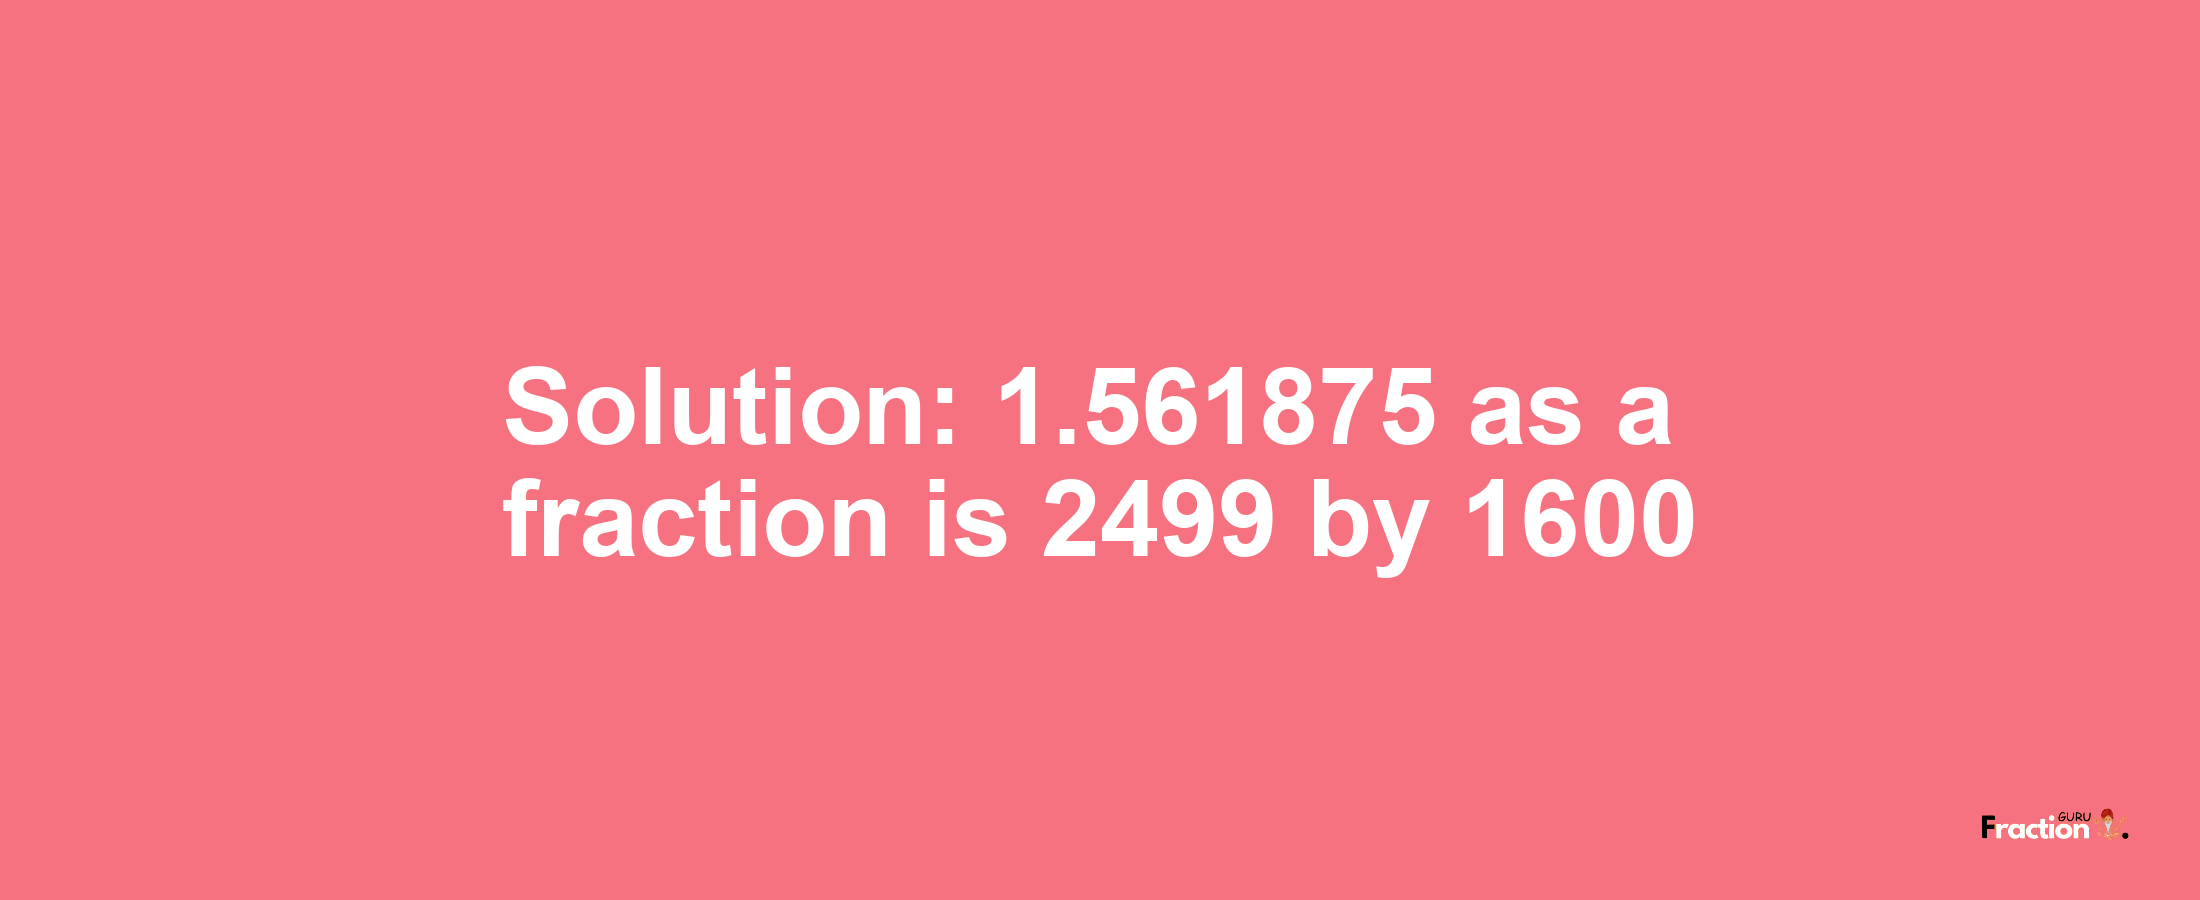 Solution:1.561875 as a fraction is 2499/1600